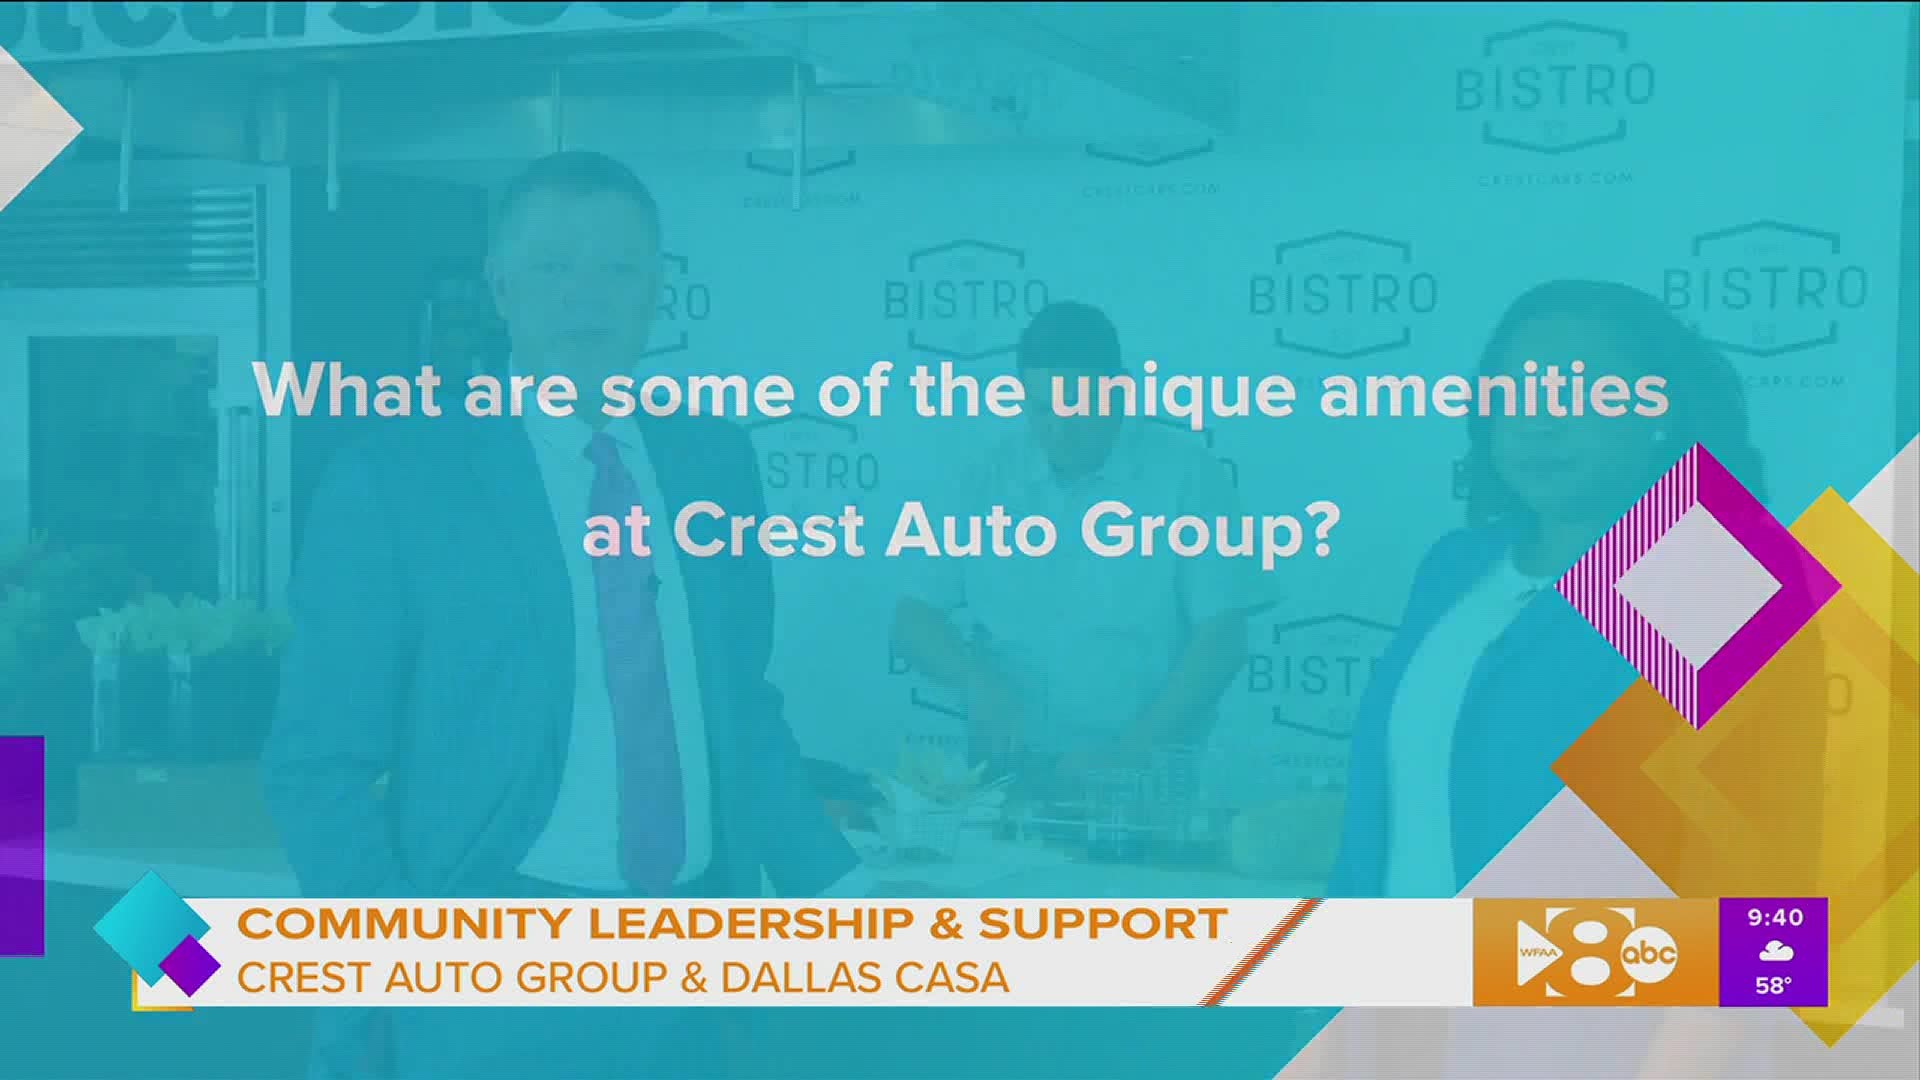 This segment sponsored by: Crest Auto Group